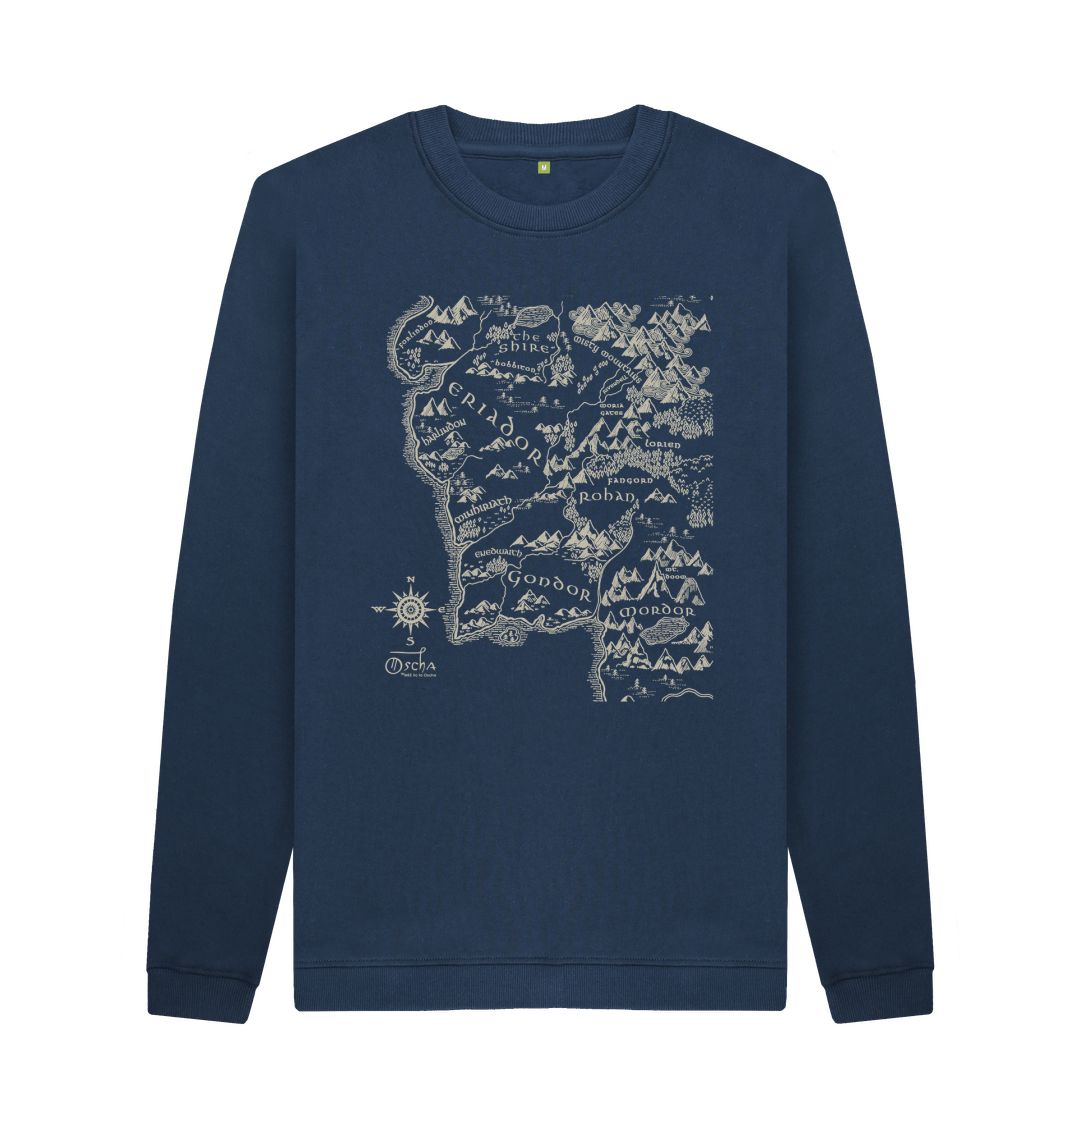 Navy Blue Realm of MIDDLE-EARTH\u2122 Crew Neck Sweater